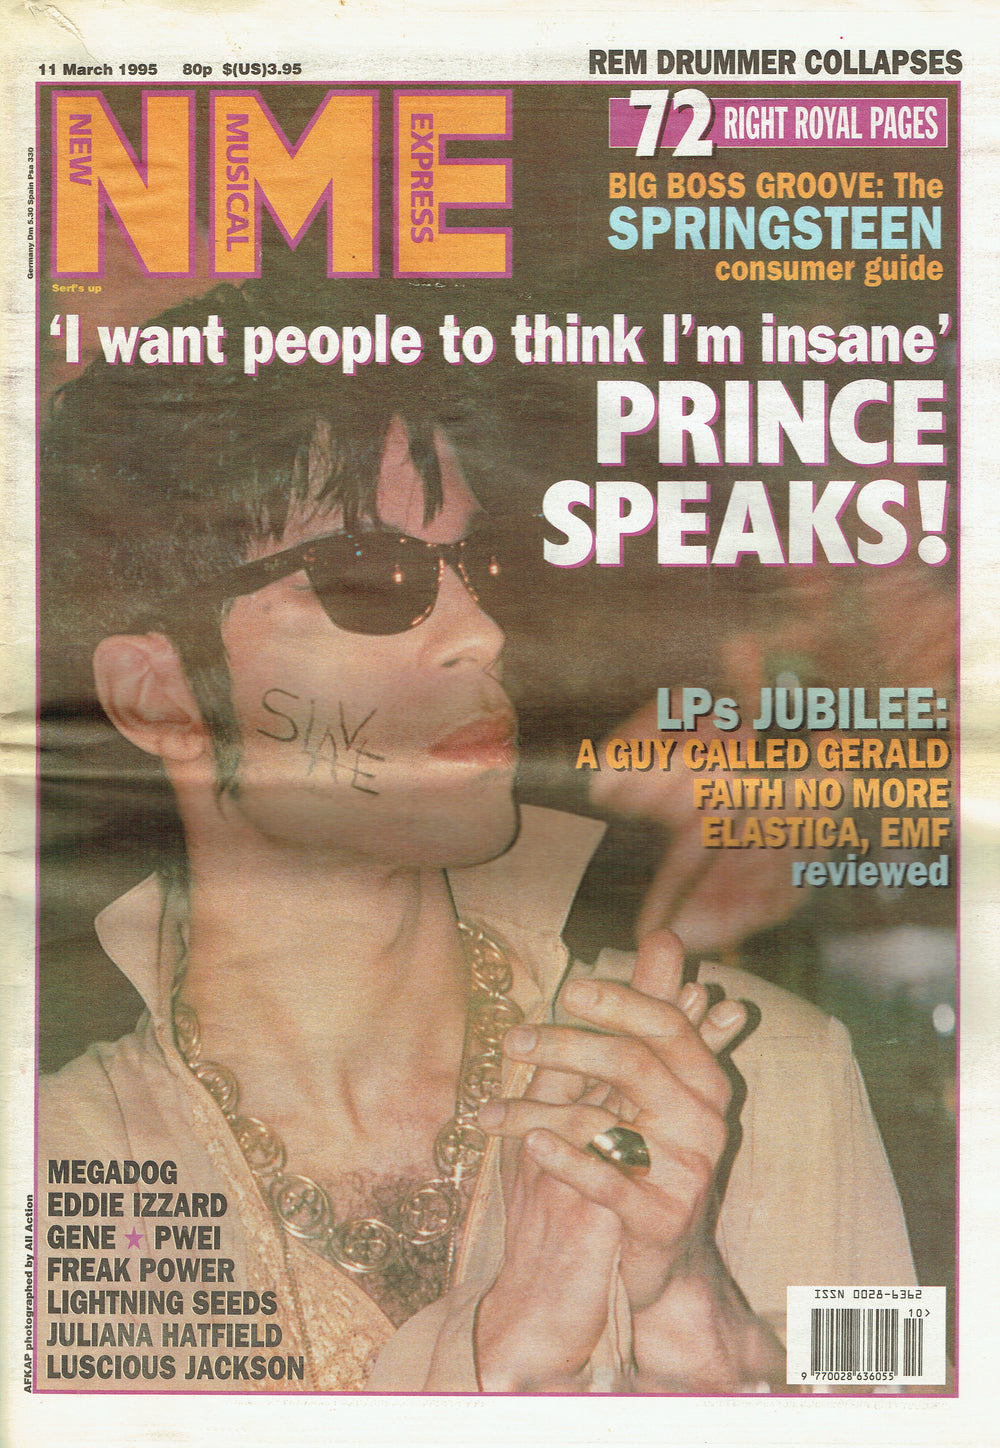 Prince NME Magazine March 1995 Cover 3 Page Article And Advert For Purple Medley